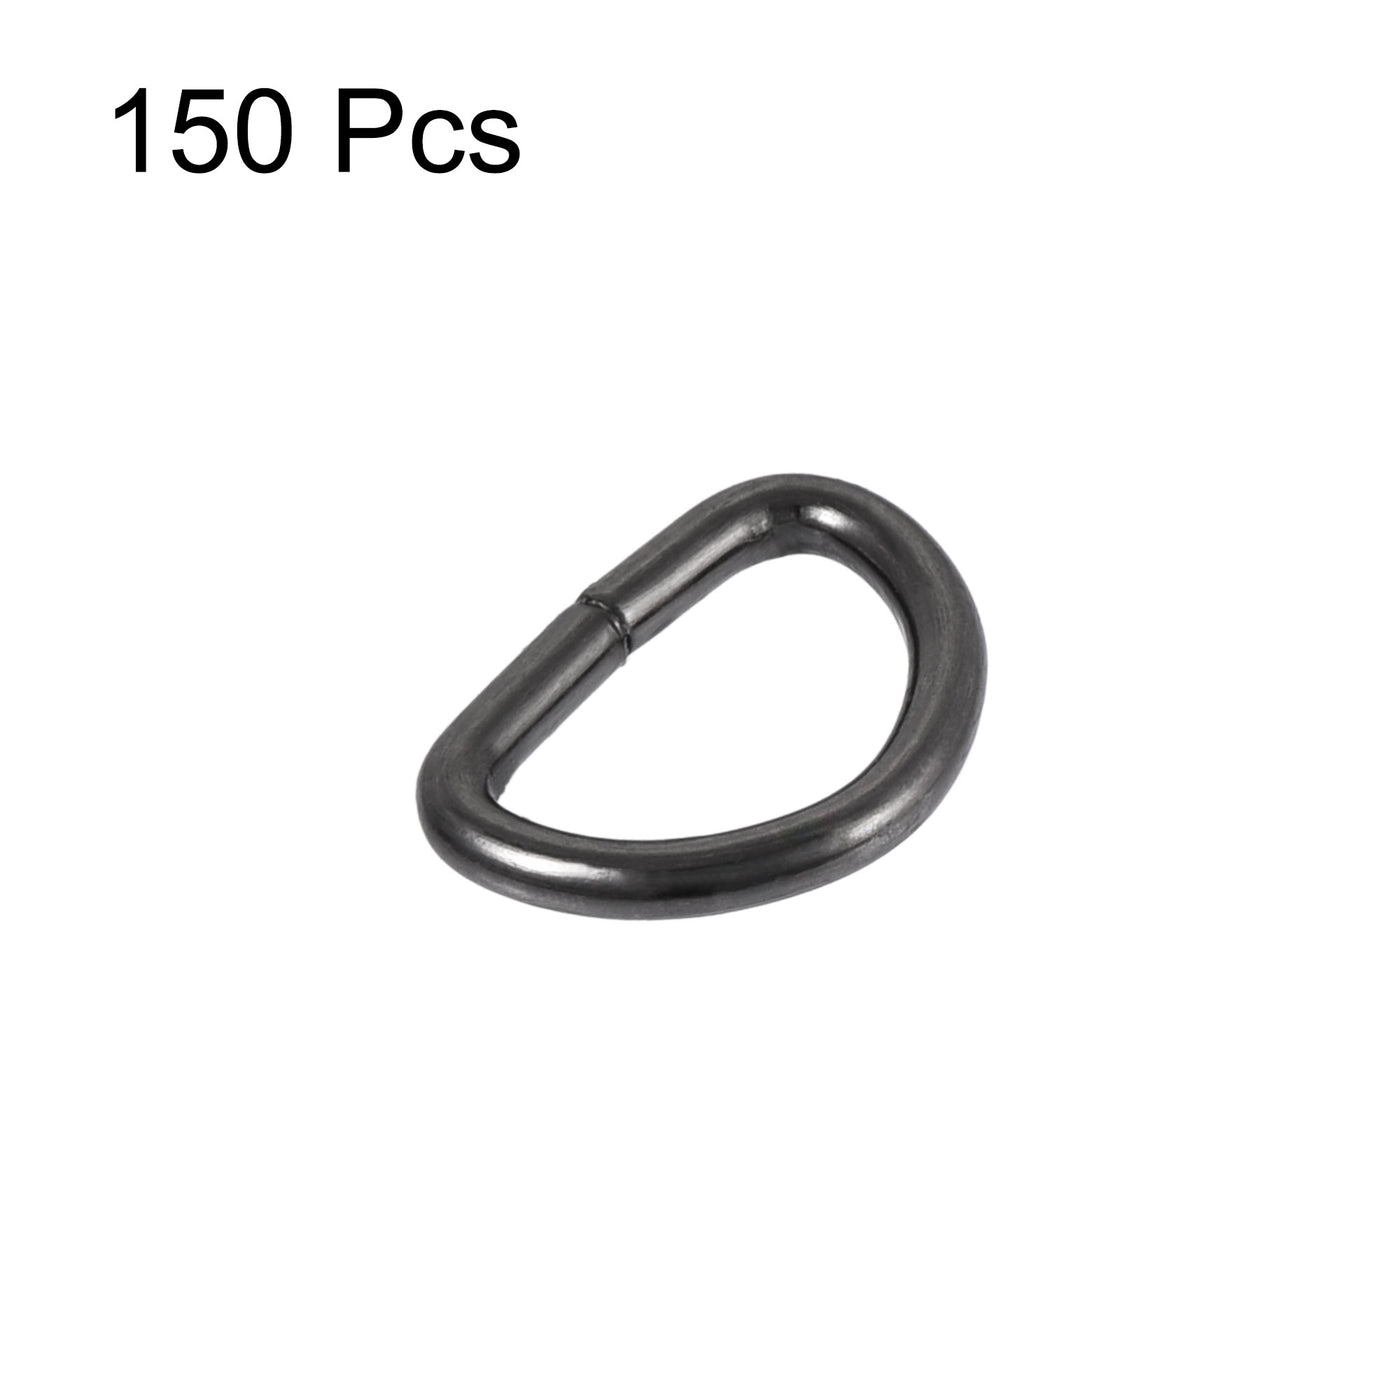 uxcell Uxcell Metal D Ring 0.39"(10mm) D-Rings Buckle for Hardware Bags Belts Craft DIY Accessories Black 150pcs